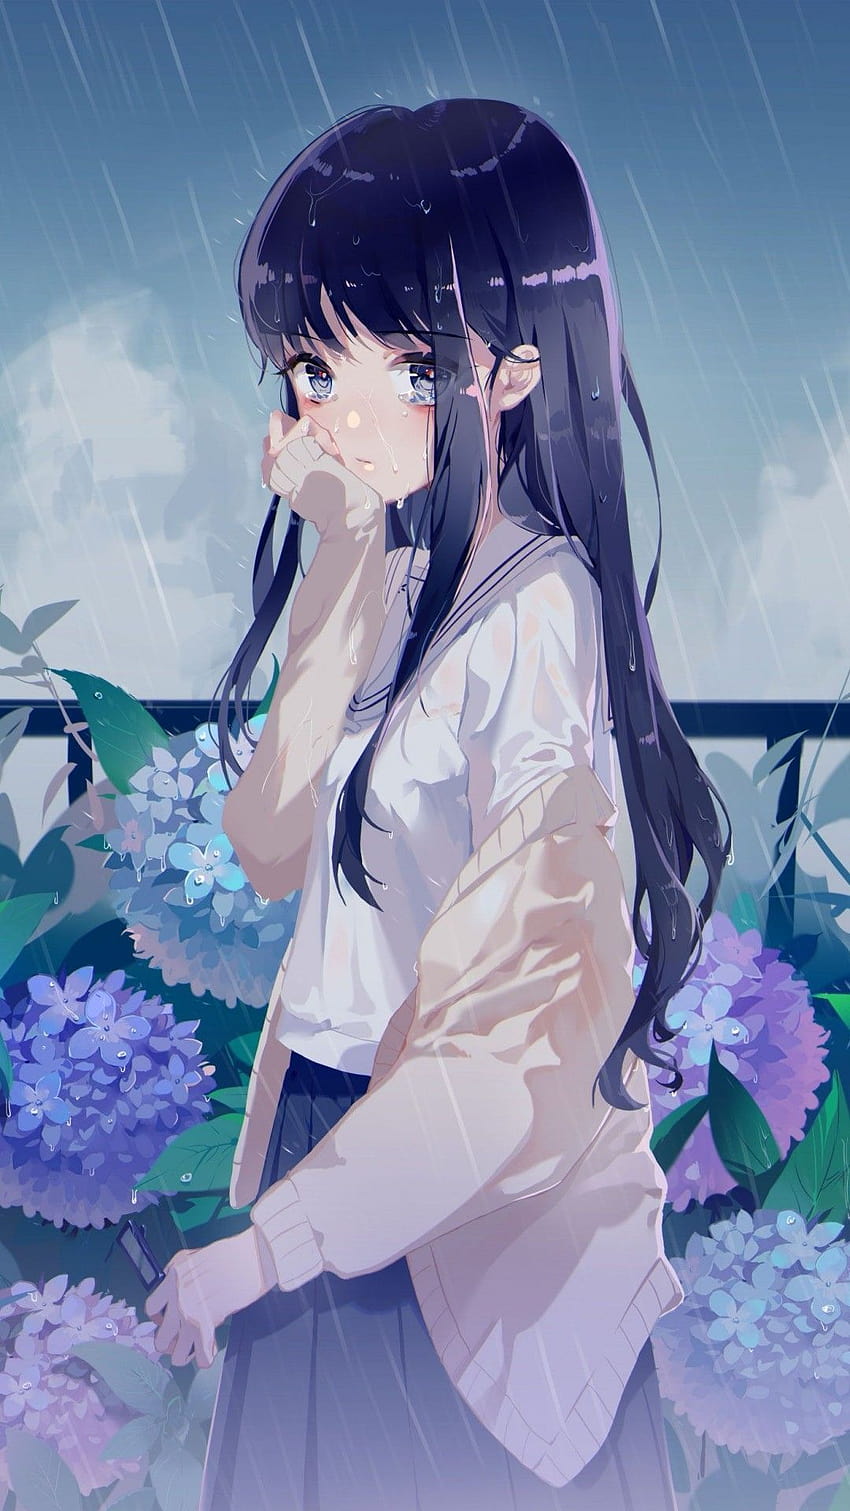 Anime Girl Crying posted by Ryan Johnson, cute crying anime HD phone wallpaper